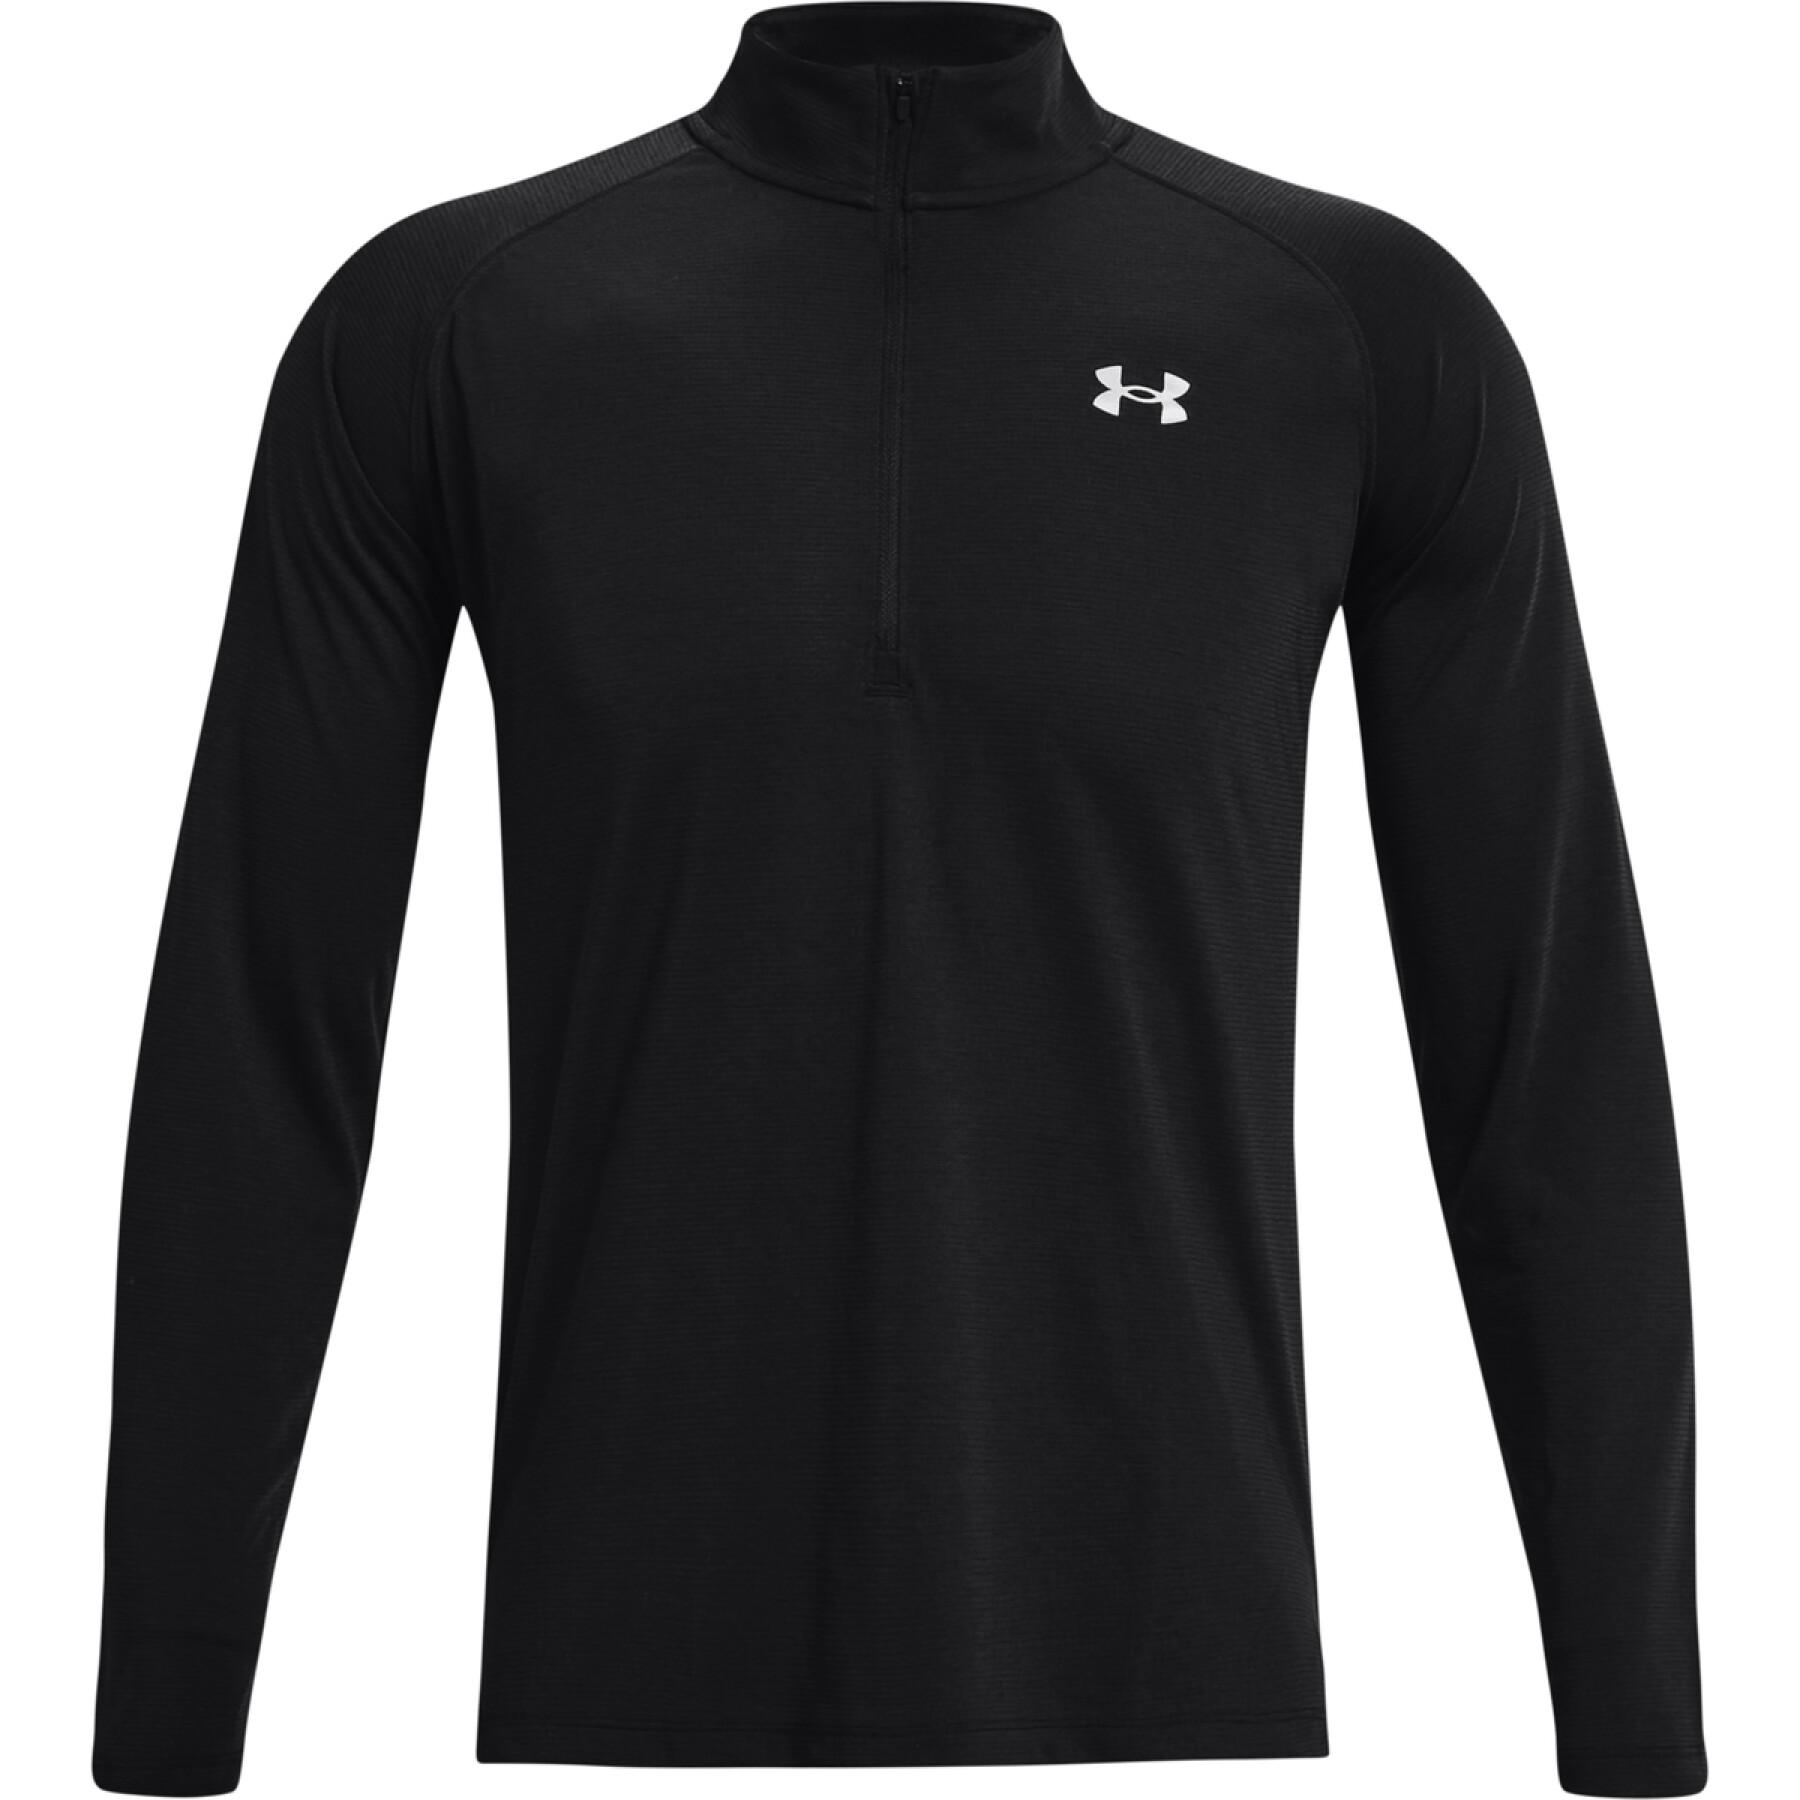 Maglia Under Armour 1/2 Zip Seamless